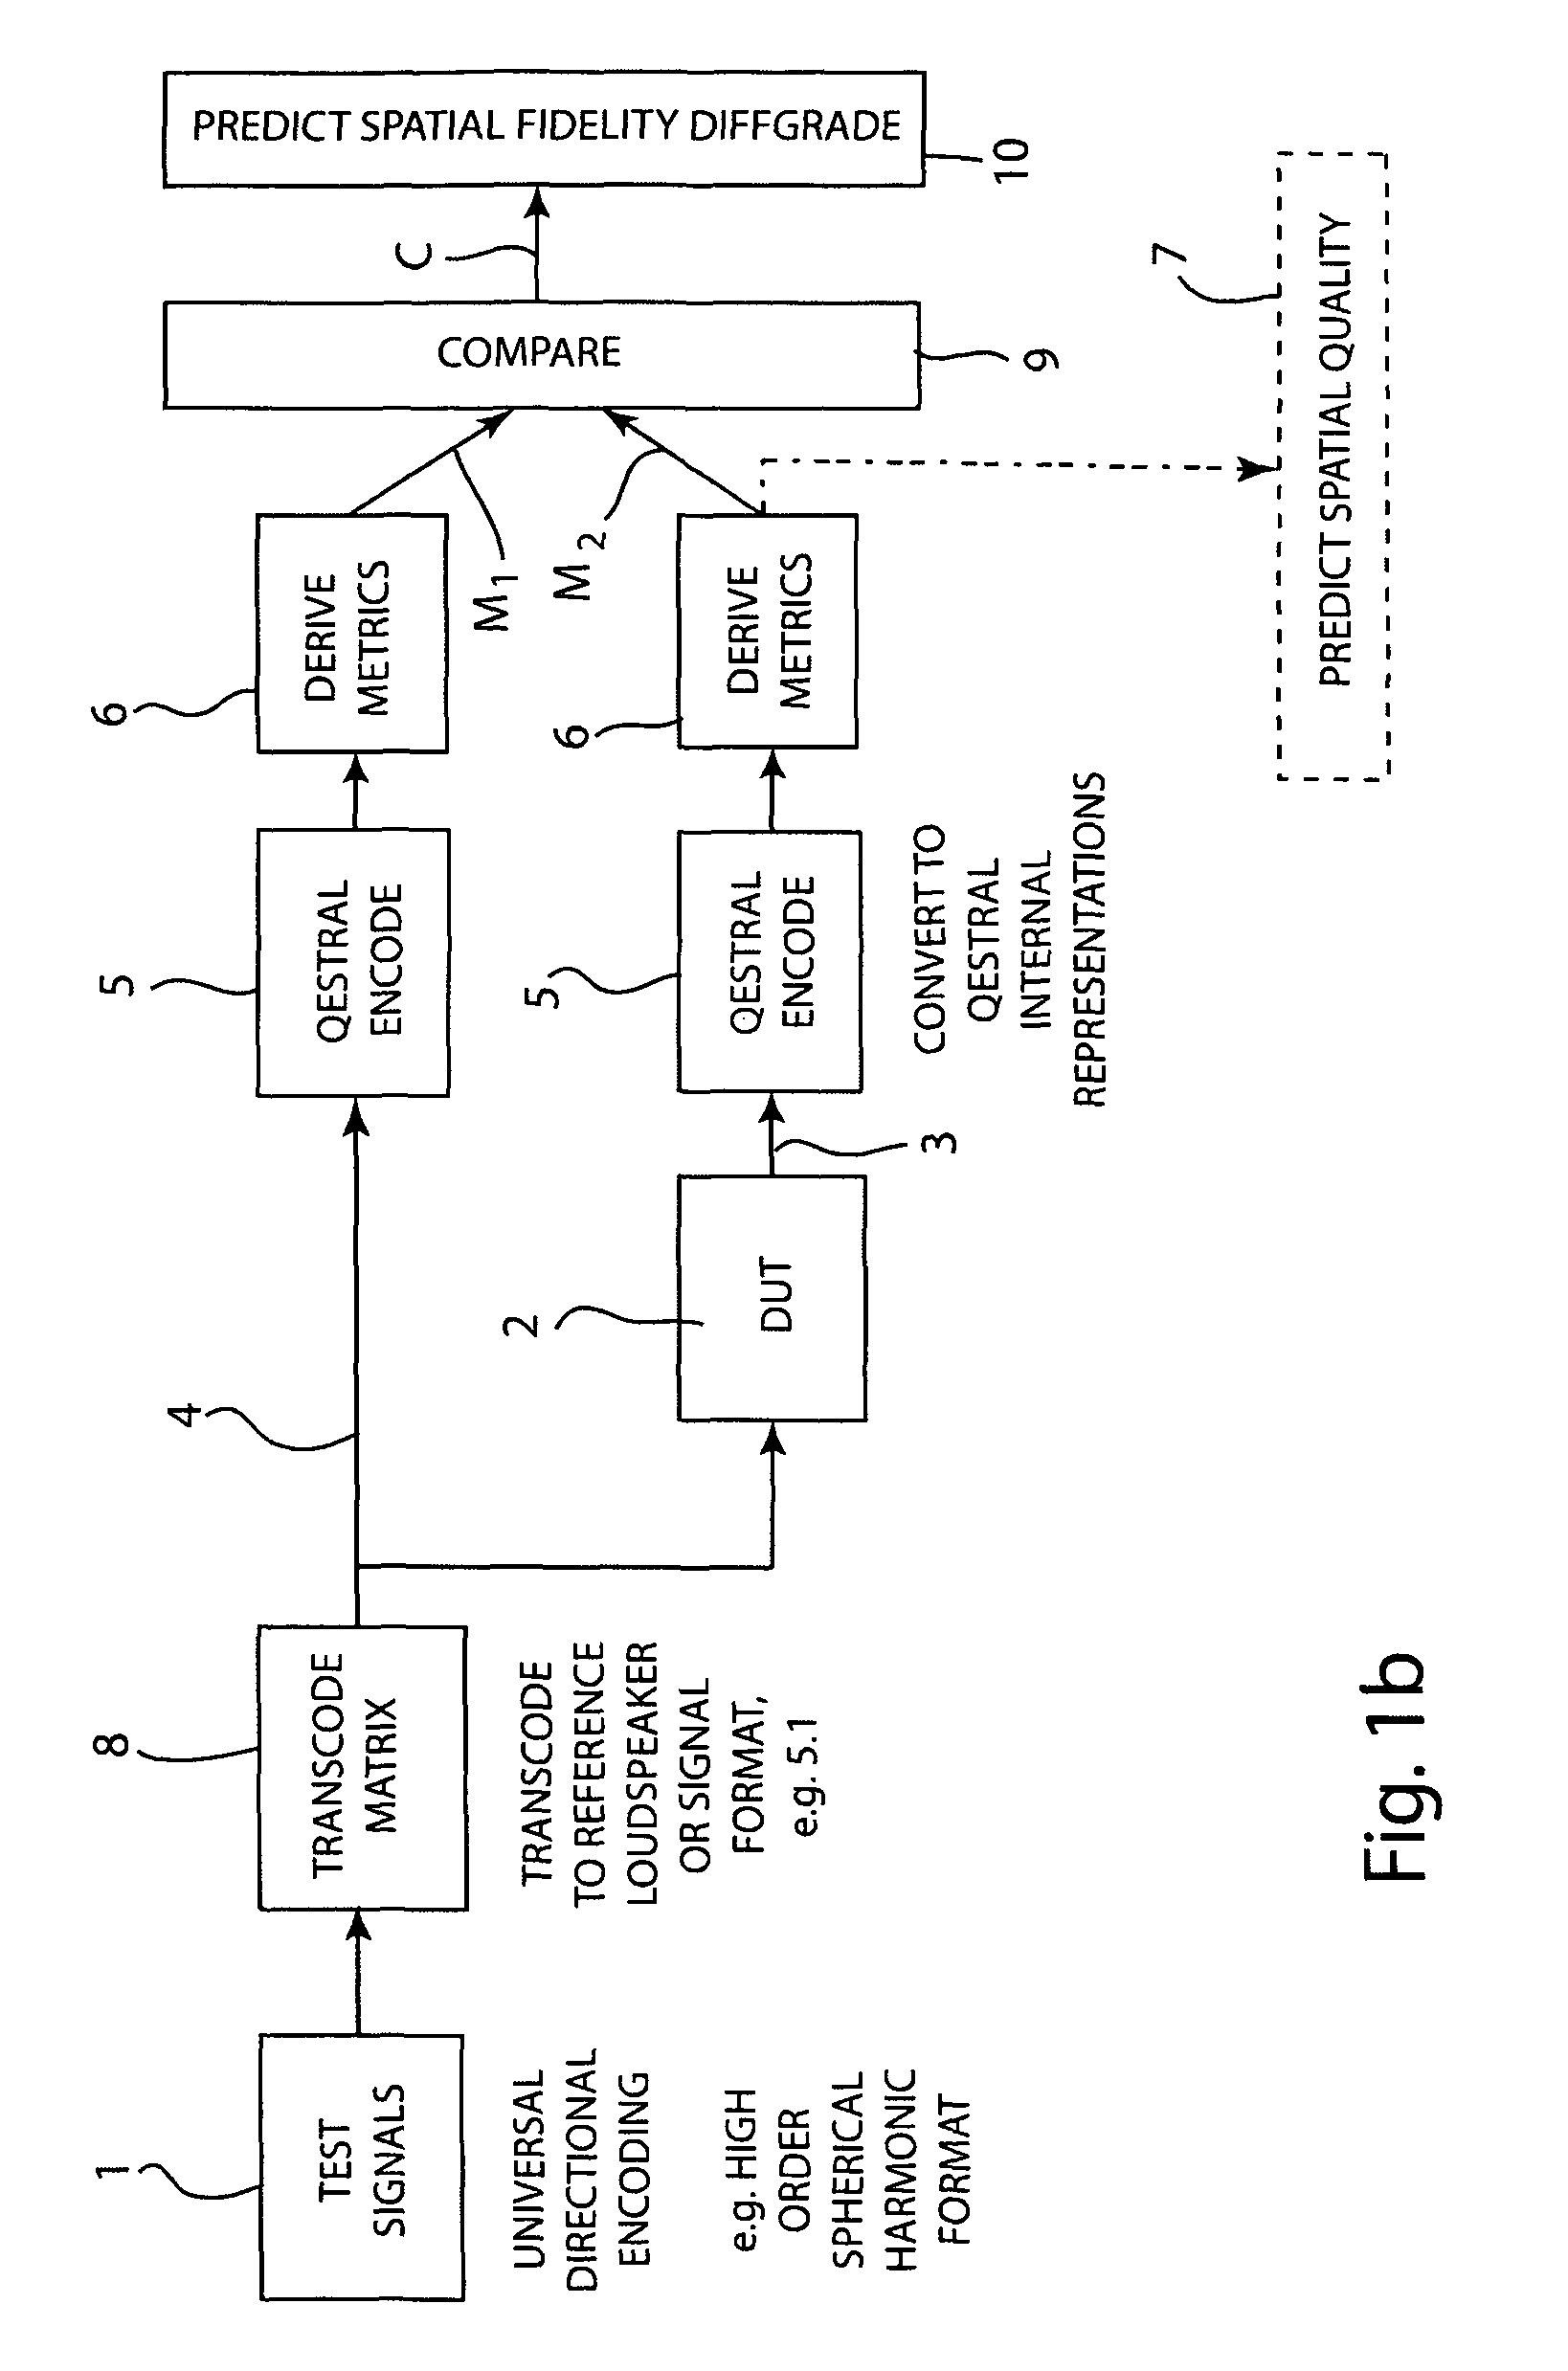 System, devices and methods for predicting the perceived spatial quality of sound processing and reproducing equipment